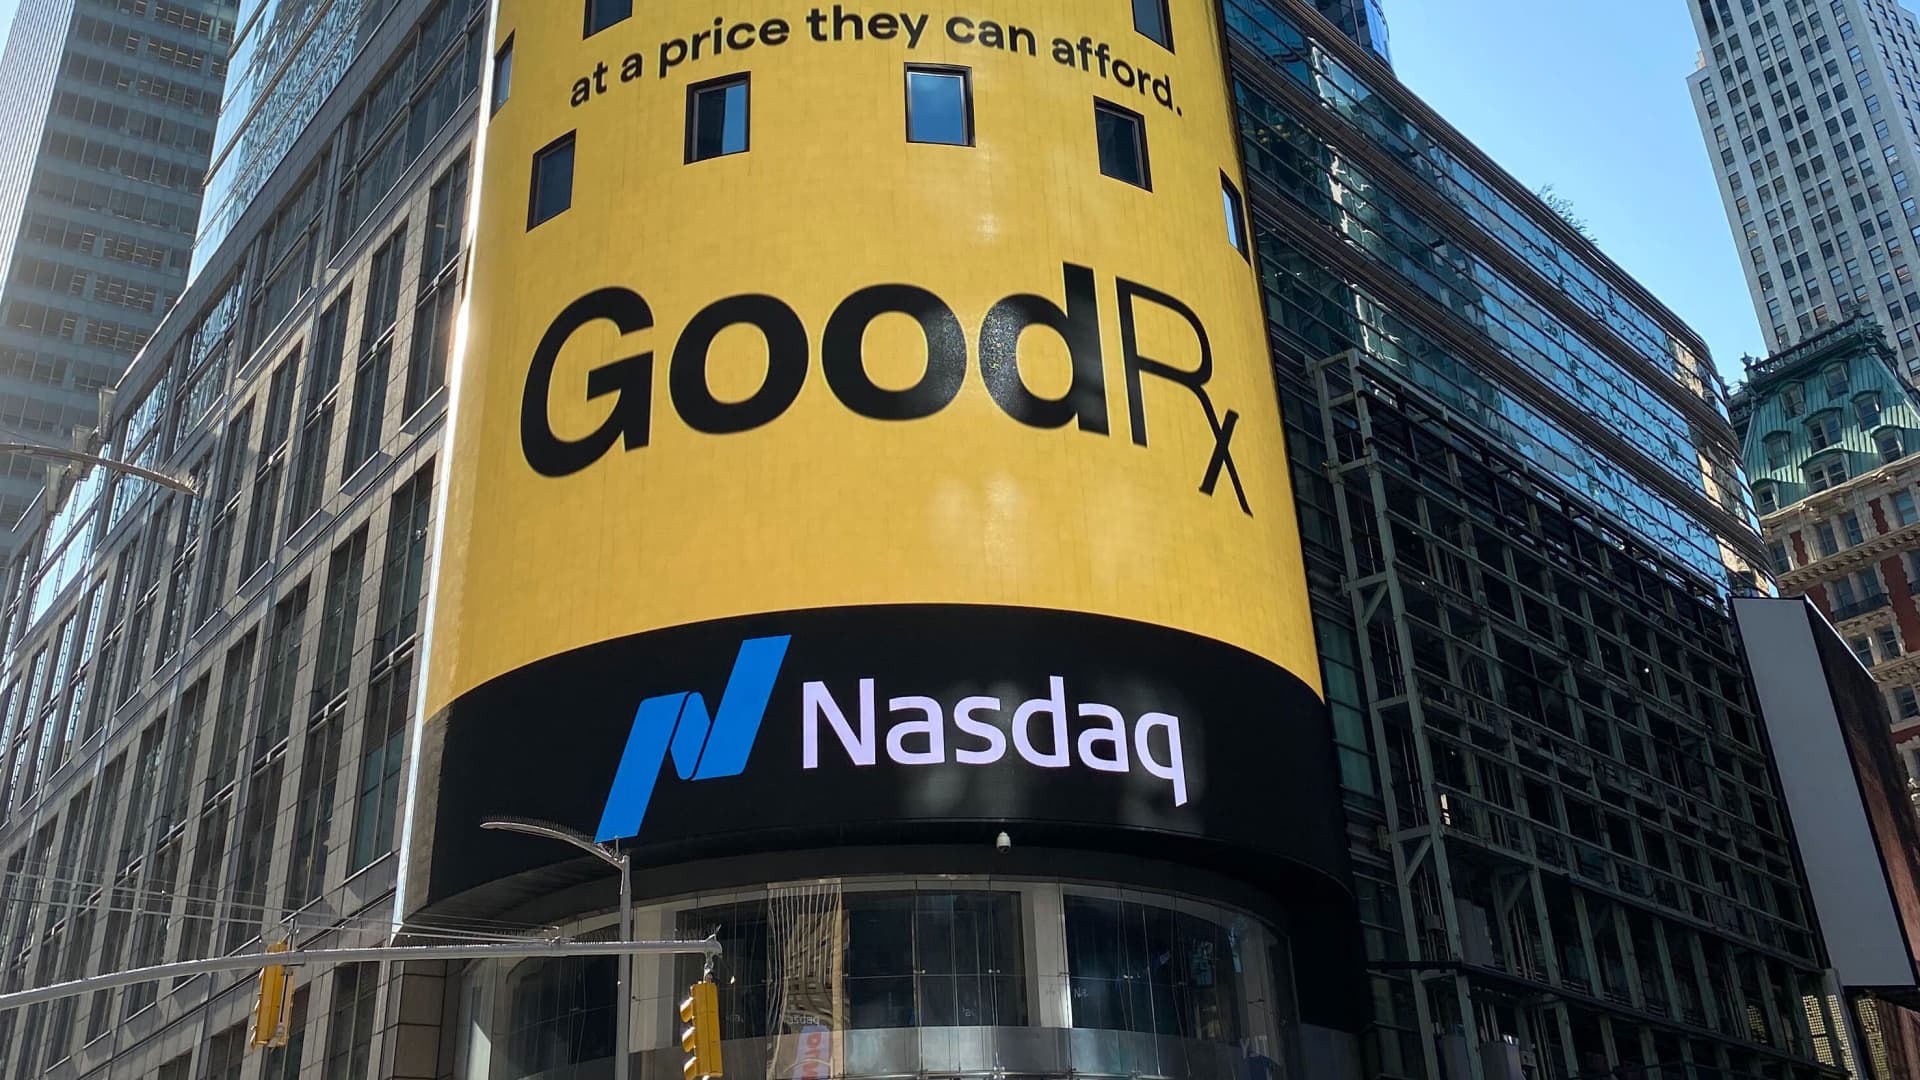 GoodRx to be barred from sharing health data for ads under proposed FTC settlement